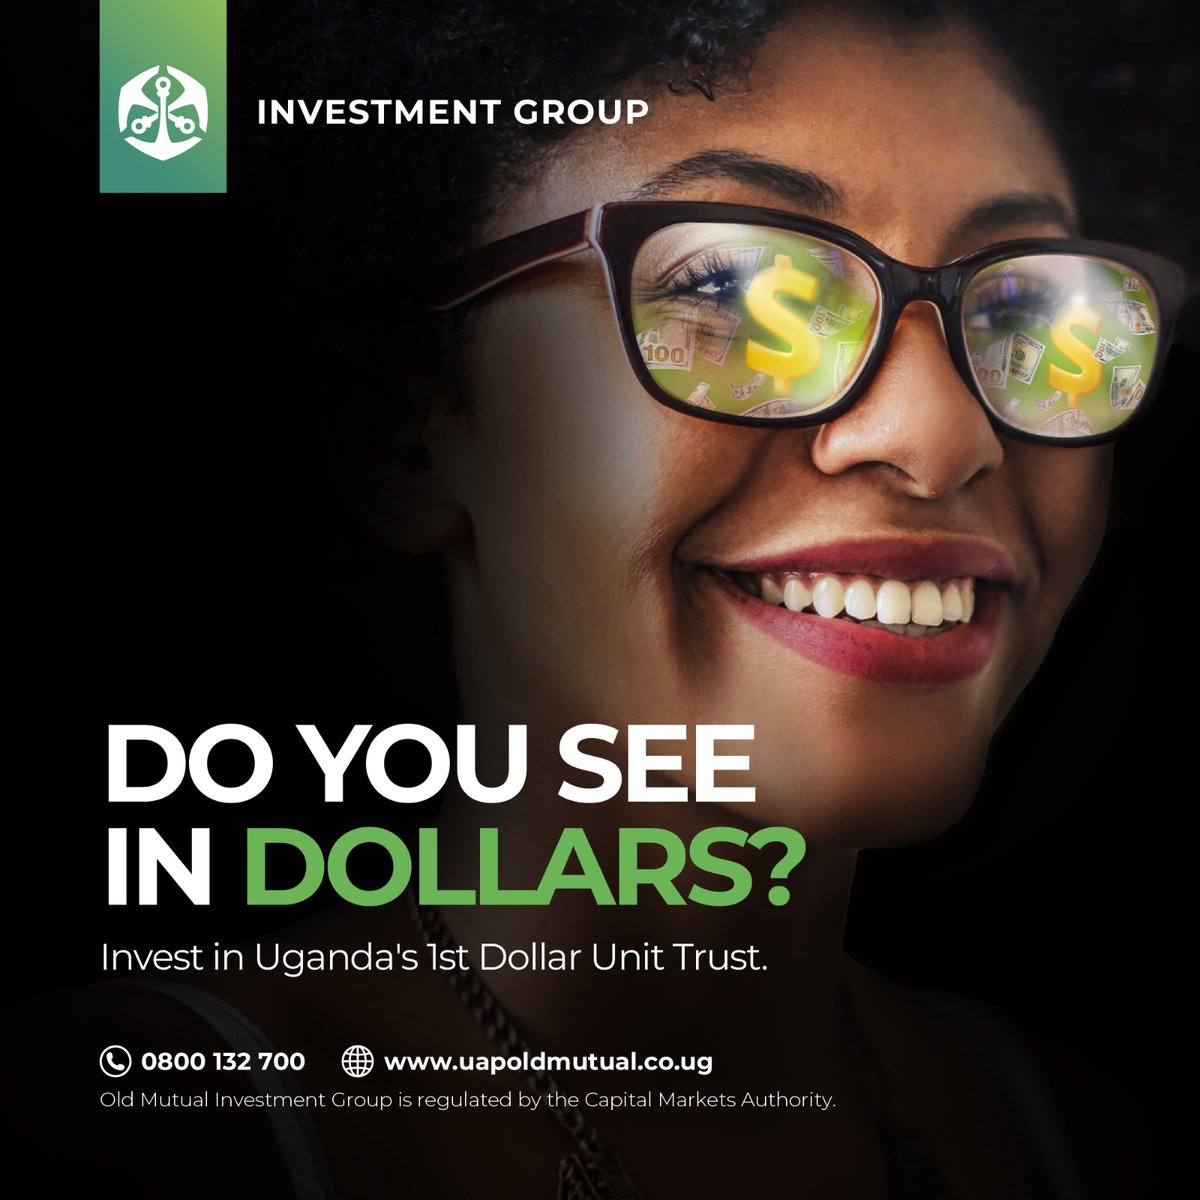 Investing in the #DollarUnitTrust Fund allows you to diversify your currency holdings by investing in dollars. This diversification helps you reduce risks and increase stability in your investment portfolio, especially in a global market context. #TutambuleFfena